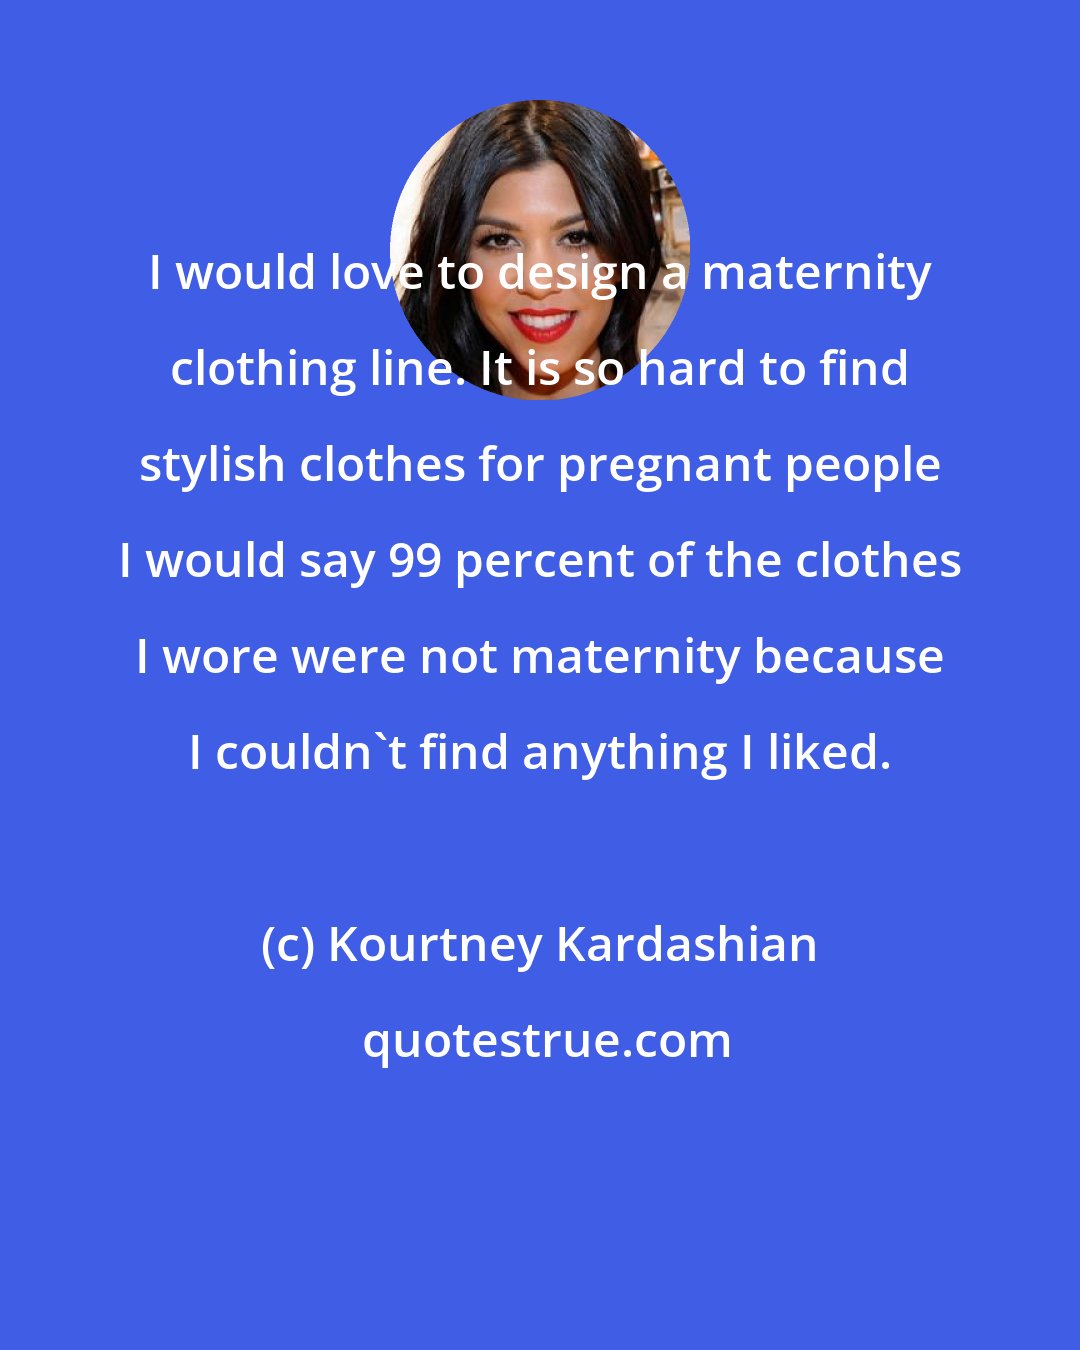 Kourtney Kardashian: I would love to design a maternity clothing line. It is so hard to find stylish clothes for pregnant people I would say 99 percent of the clothes I wore were not maternity because I couldn't find anything I liked.